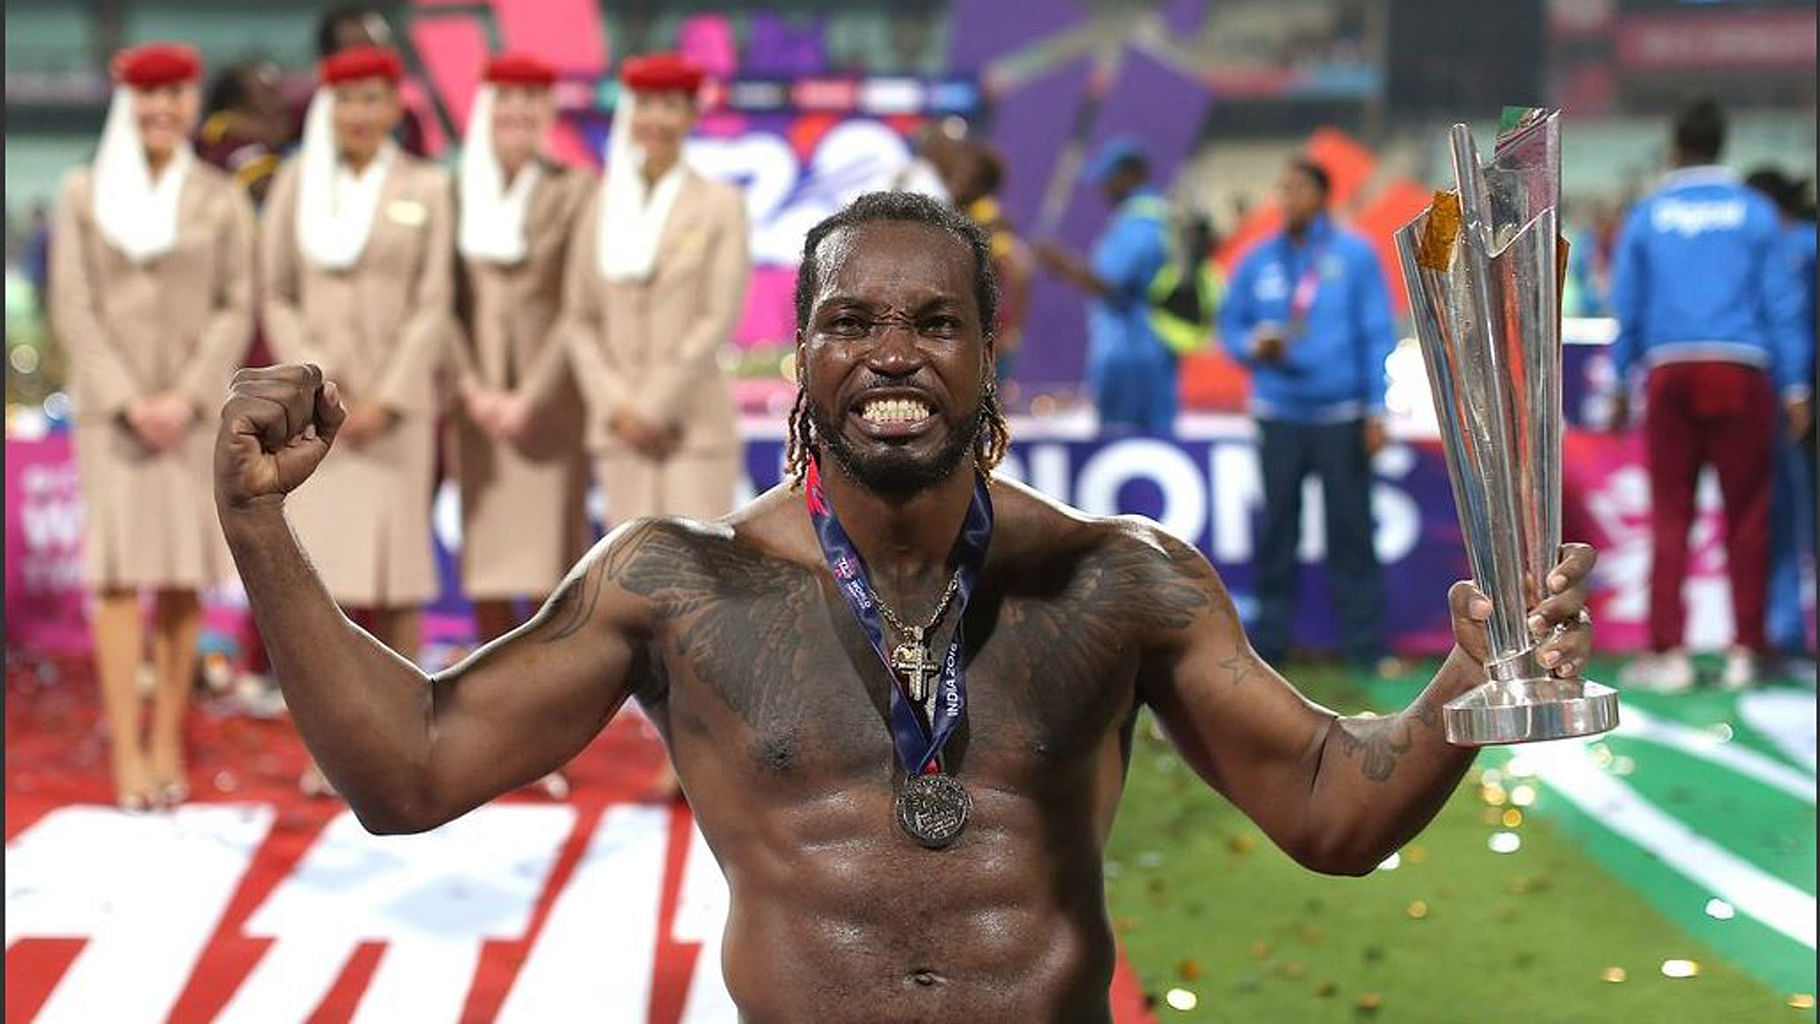 Chris Gayle after winning the ICC WT20. (Photo: Twitter/@icc)